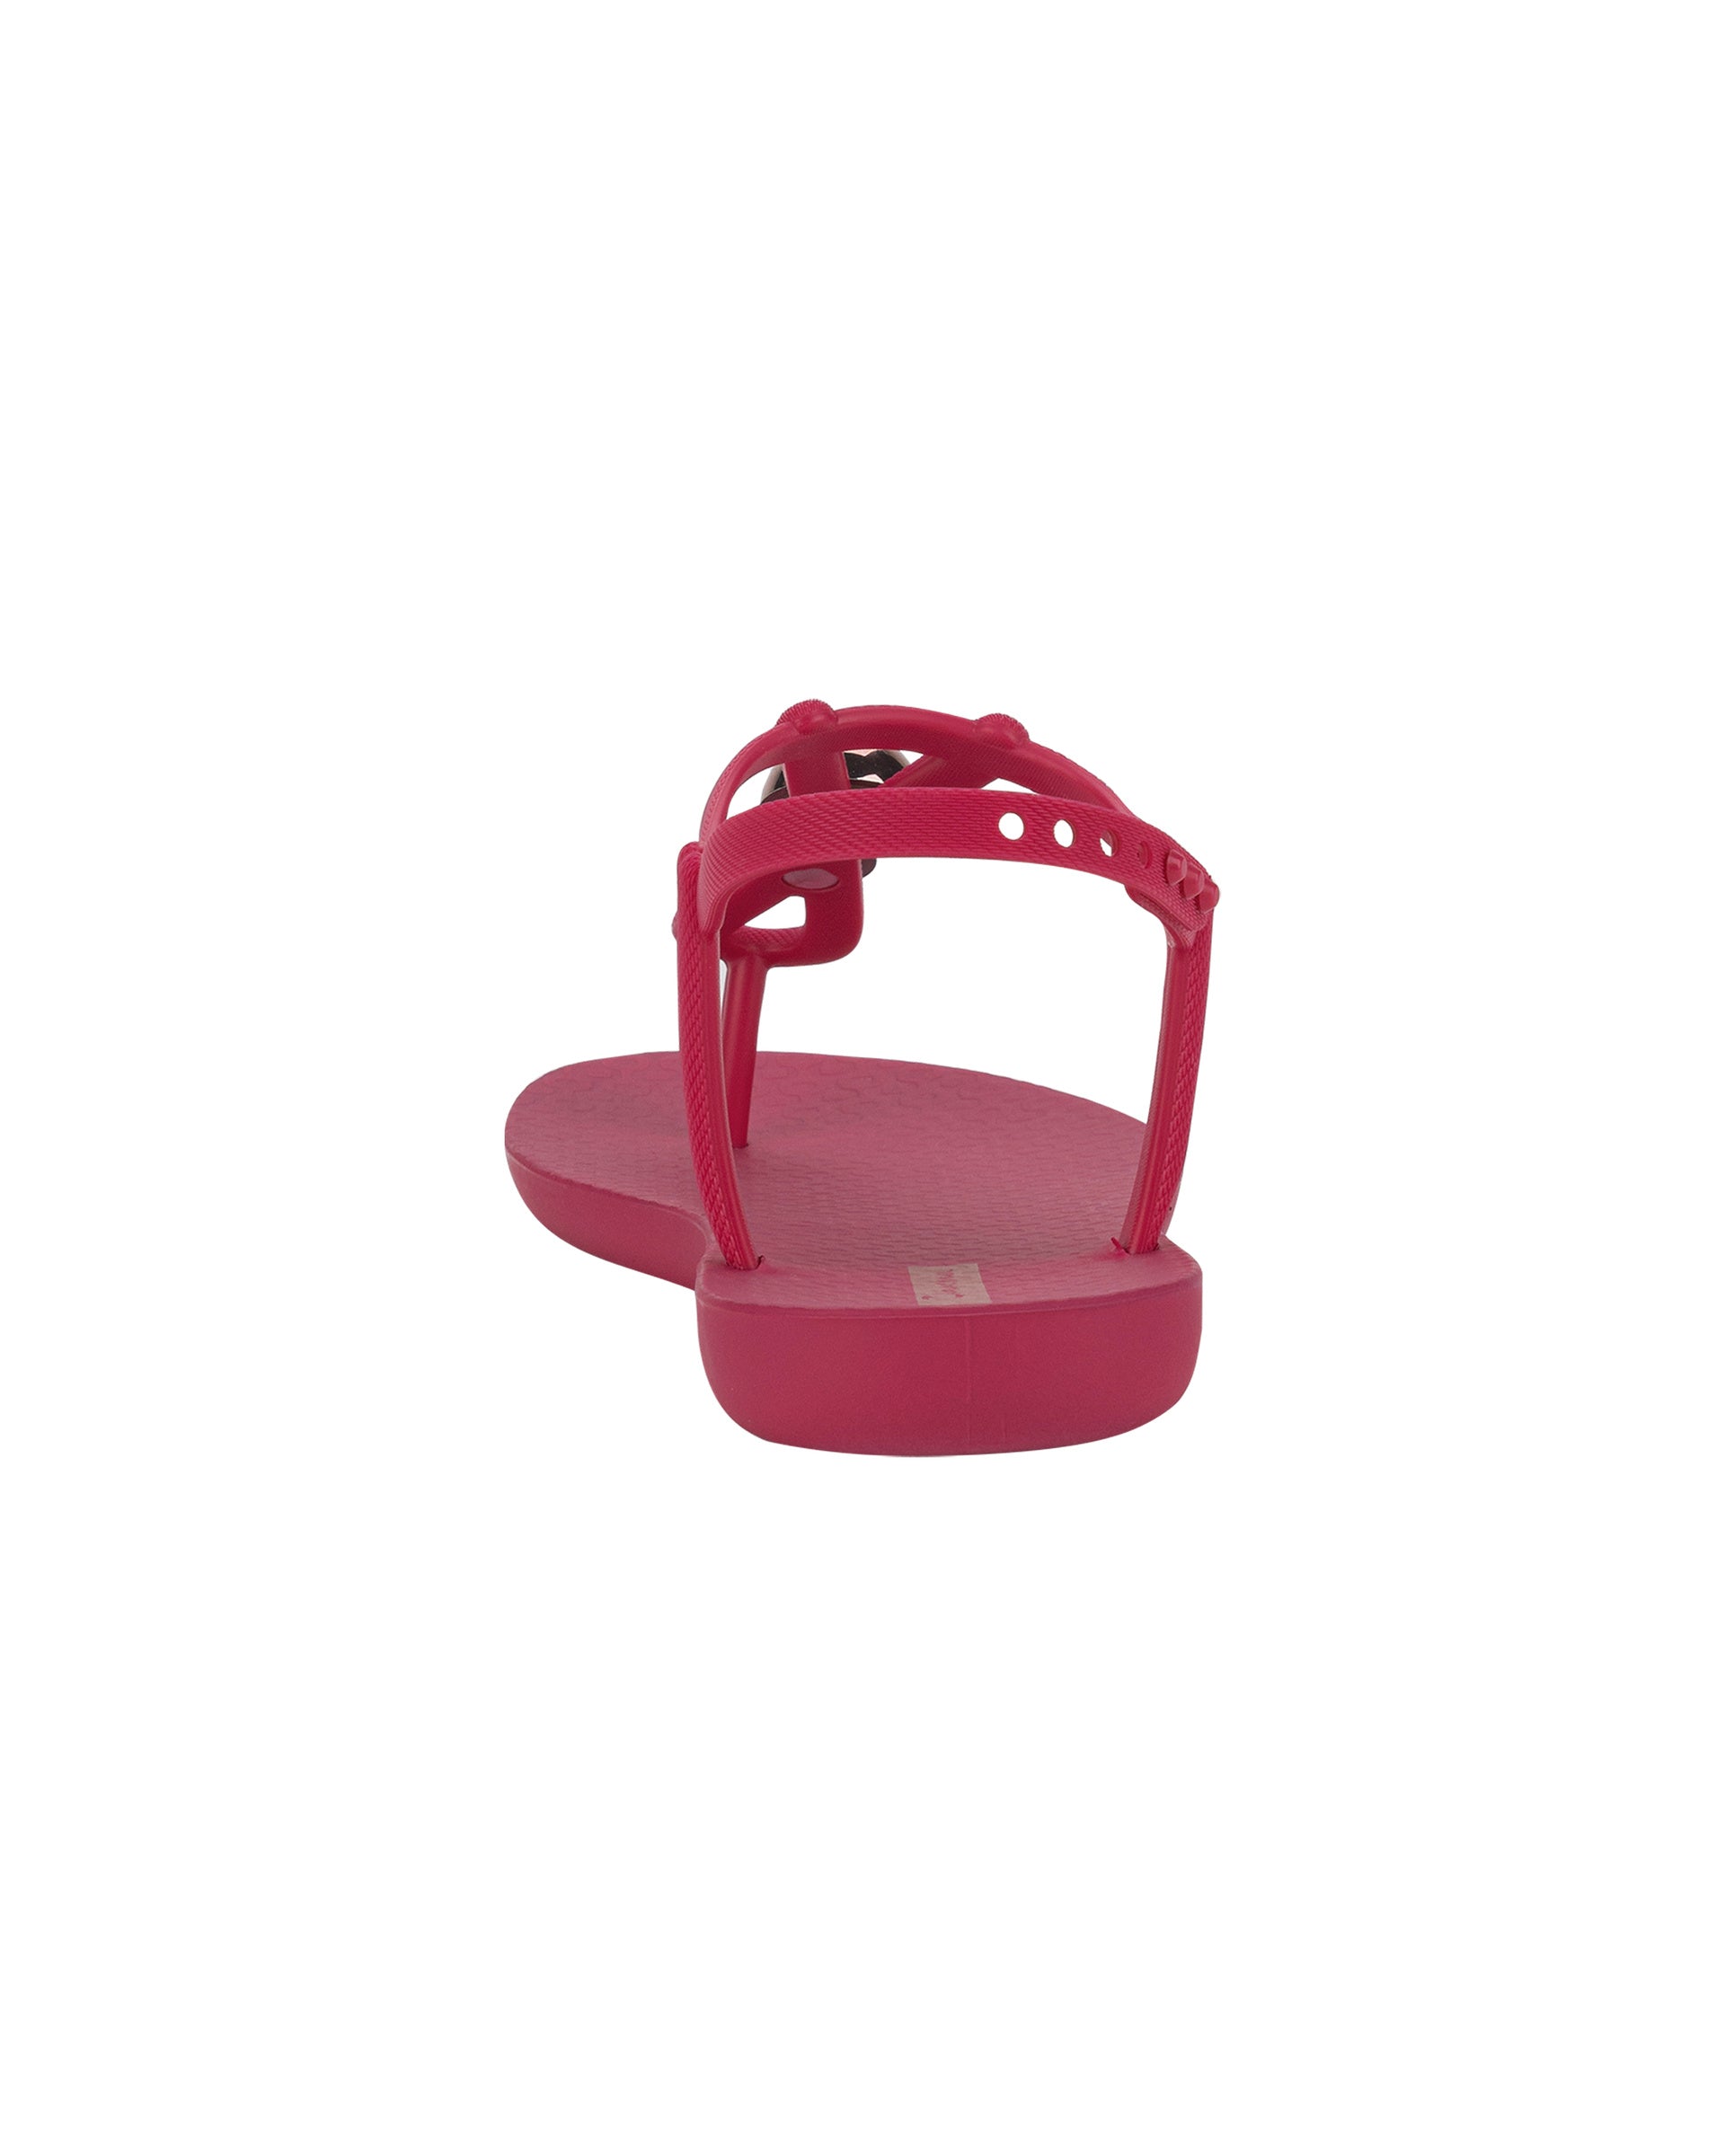 Back view of a pink Ipanema Class Spheres women's t-strap sandal with metallic bauble.